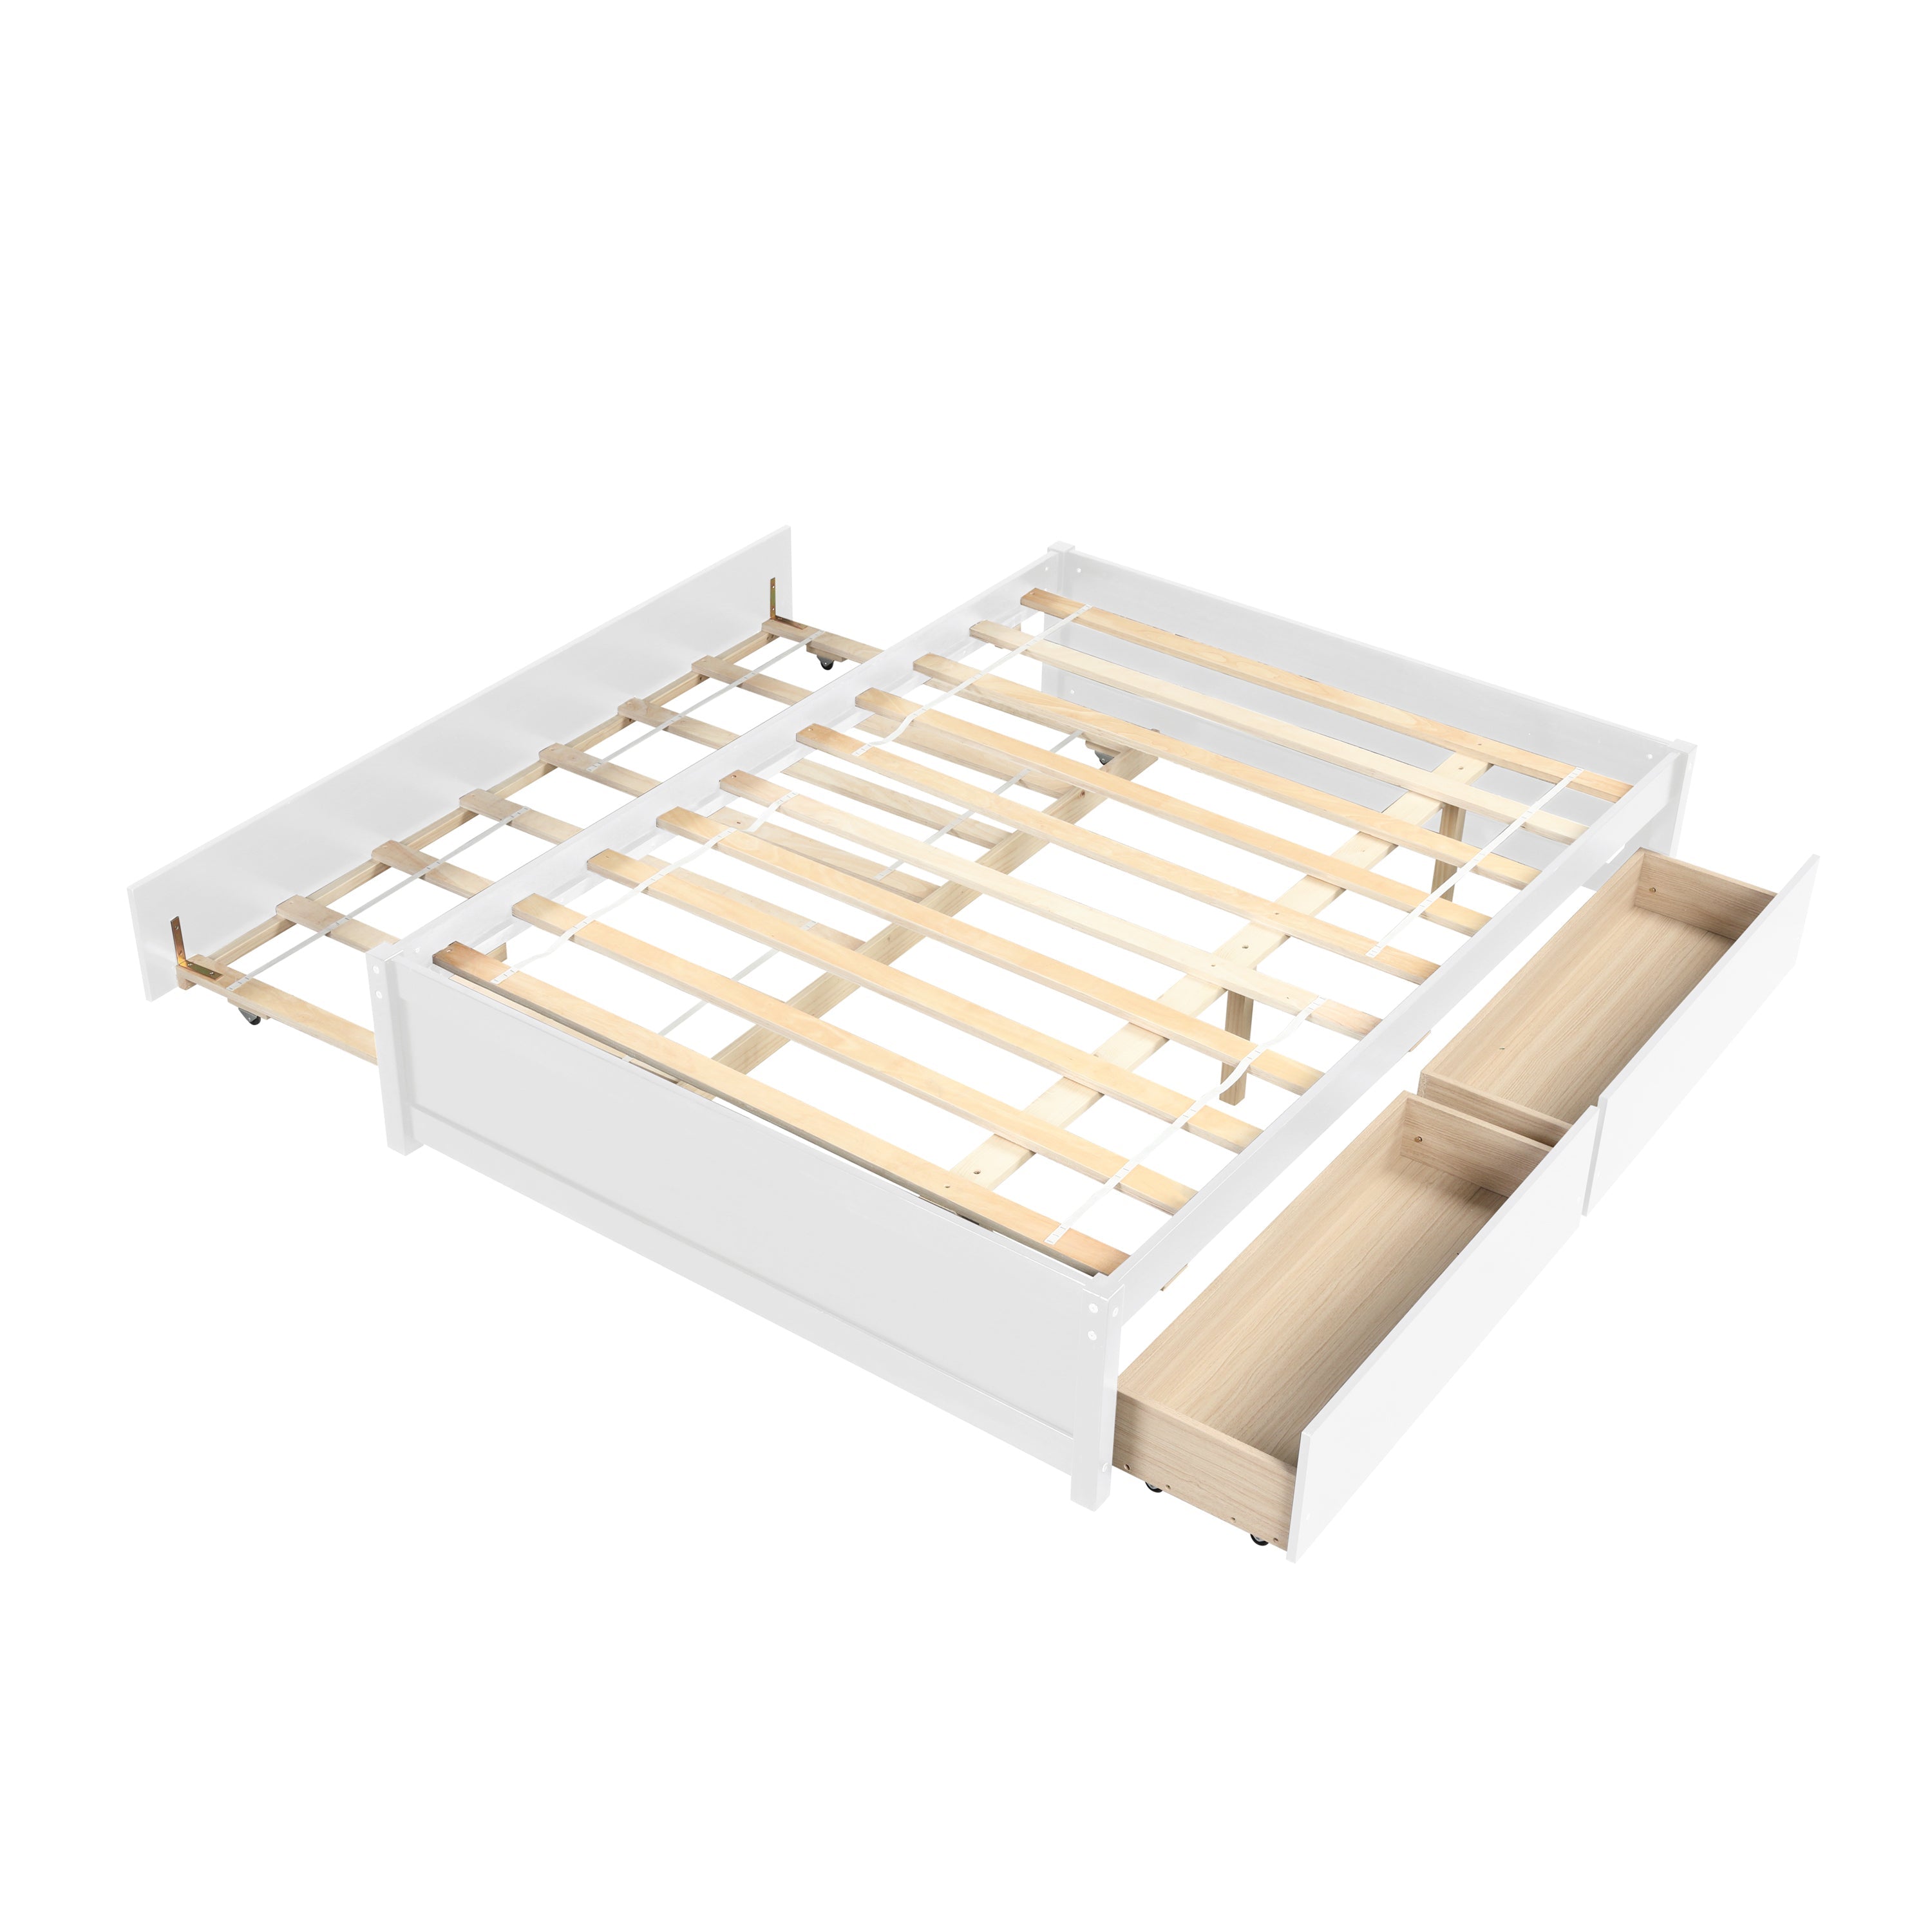 Full Bed with Twin Trundle and Two Drawers | White Finish | Space-Saving Solution